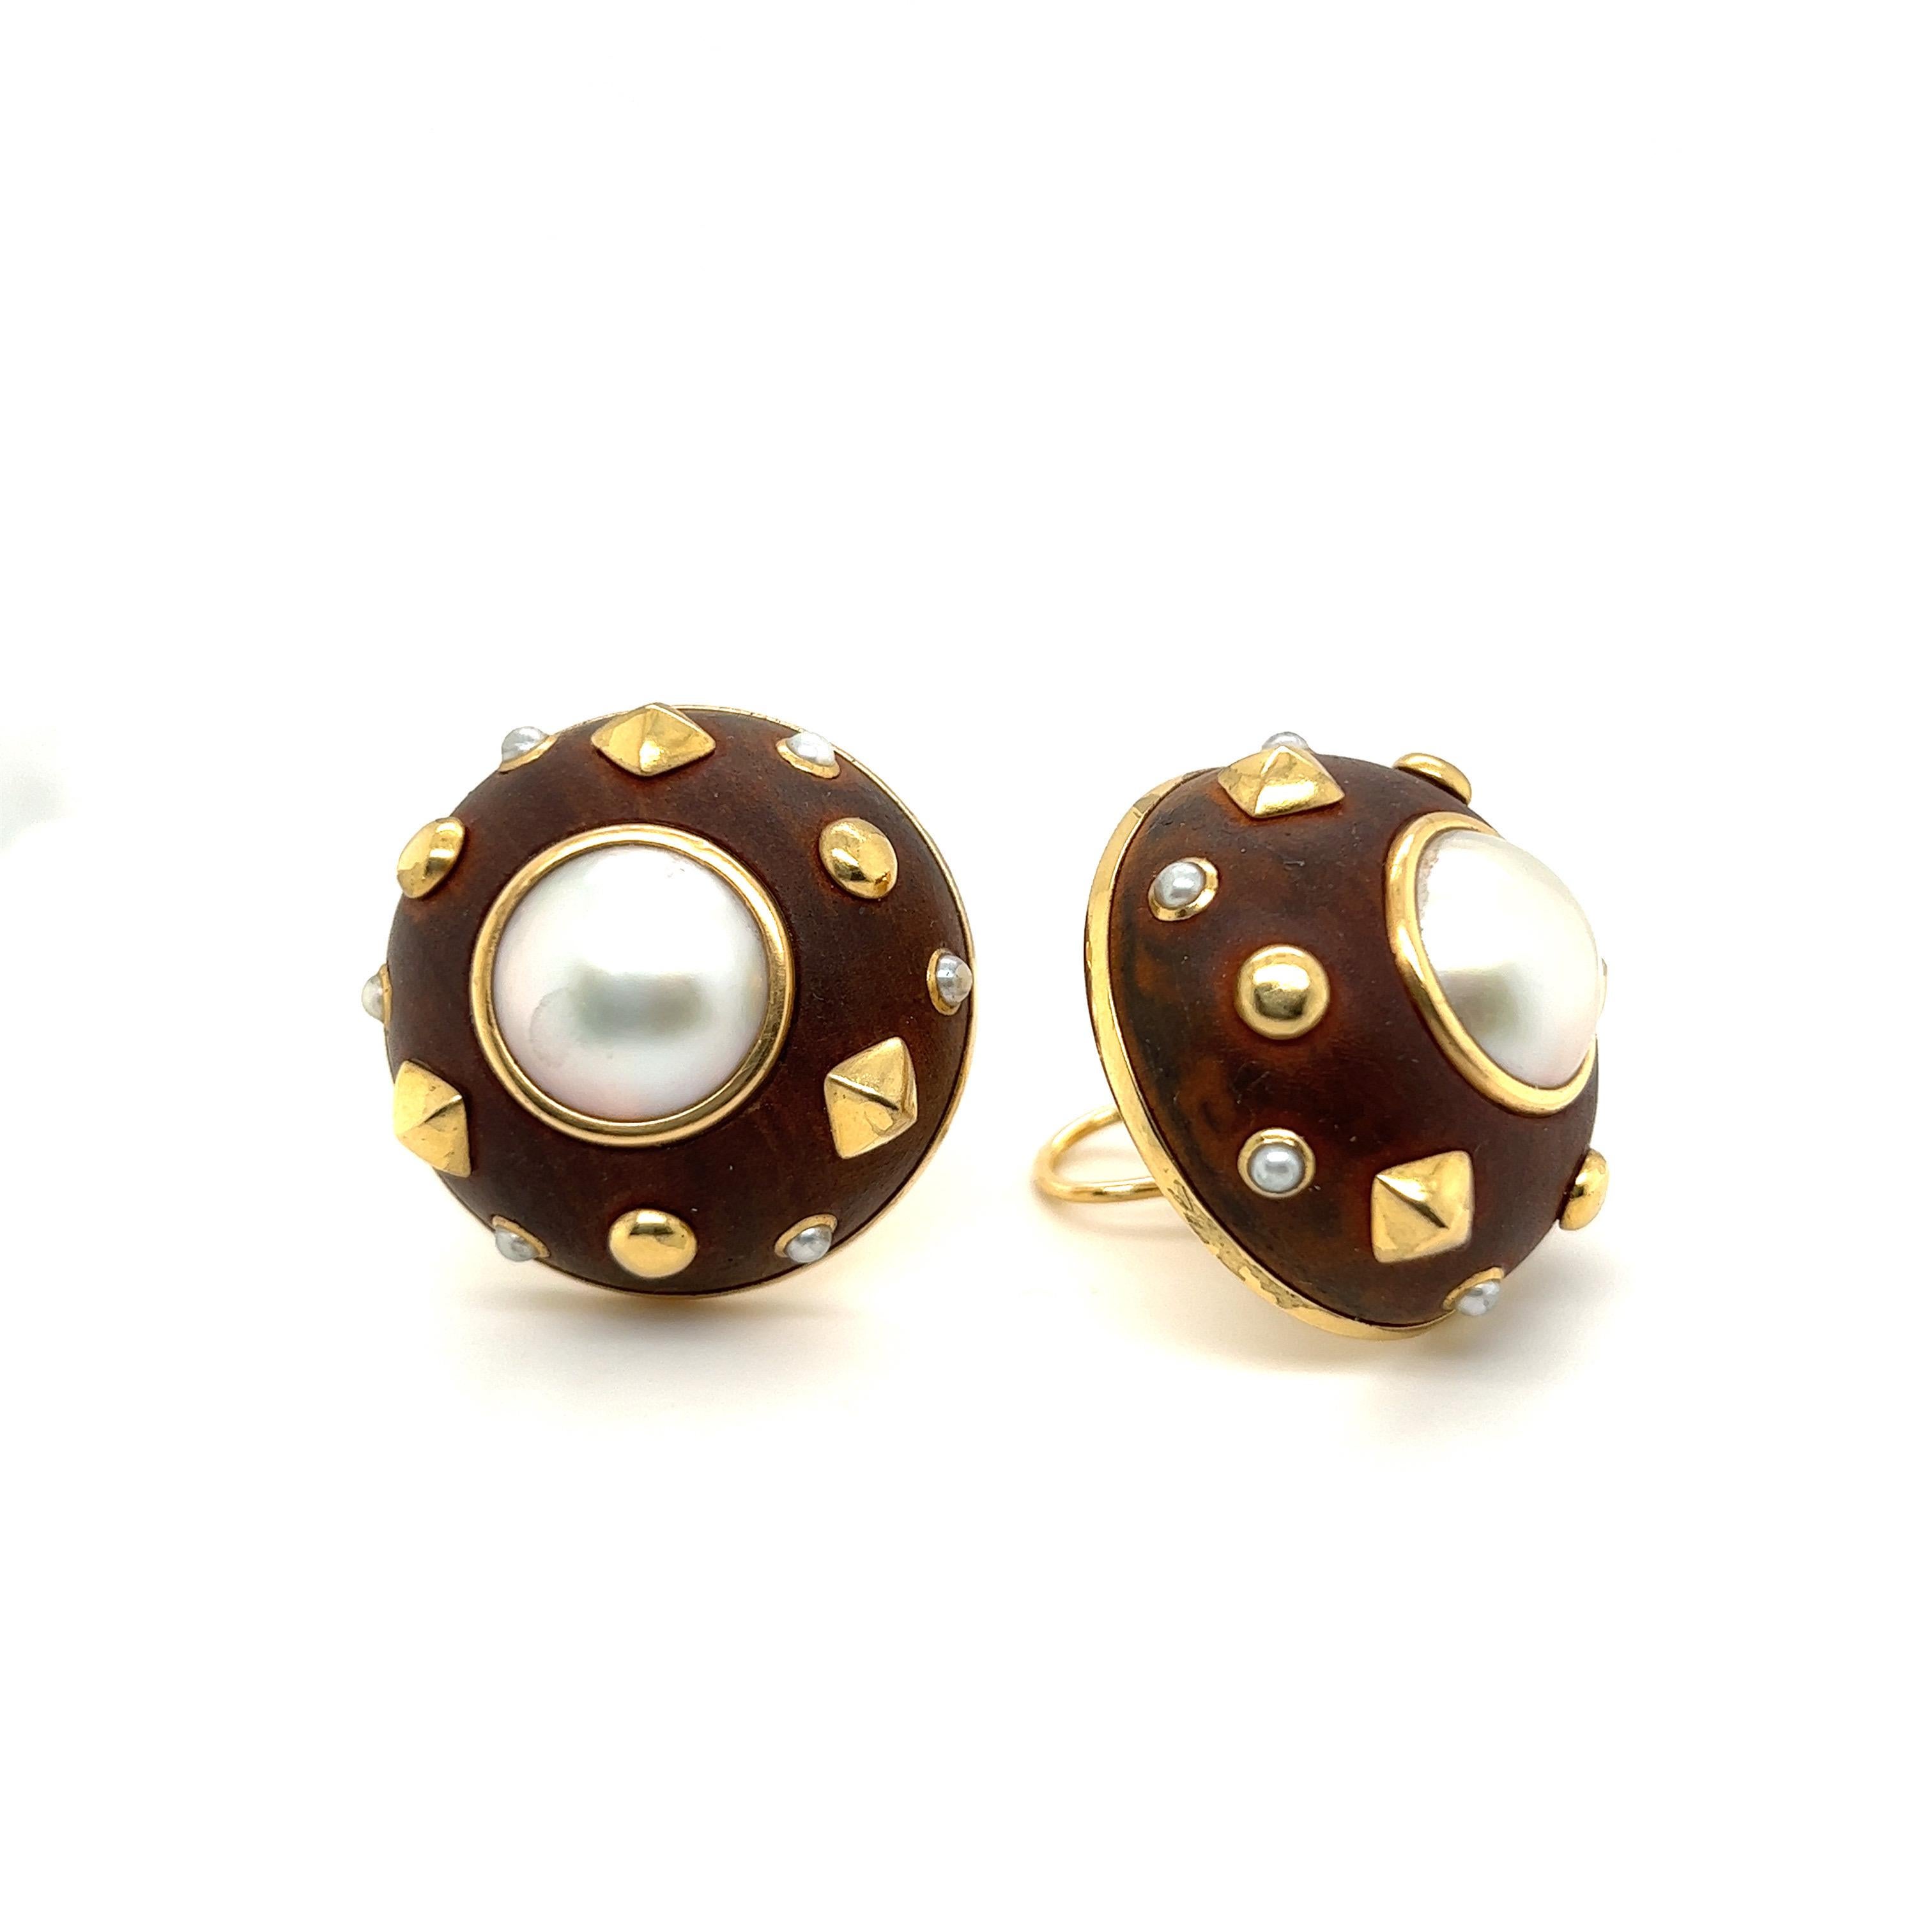 Striking pair of 18 karat yellow gold, wood and pearl earrings by Trianon, 1980s.
Large round earclips crafted in 18 karat yellow gold and set with wood, 2 mabe pearls of 13 mm ( 0.5 in ) diameter and 12 smaller seed pearls. 
They are completed by